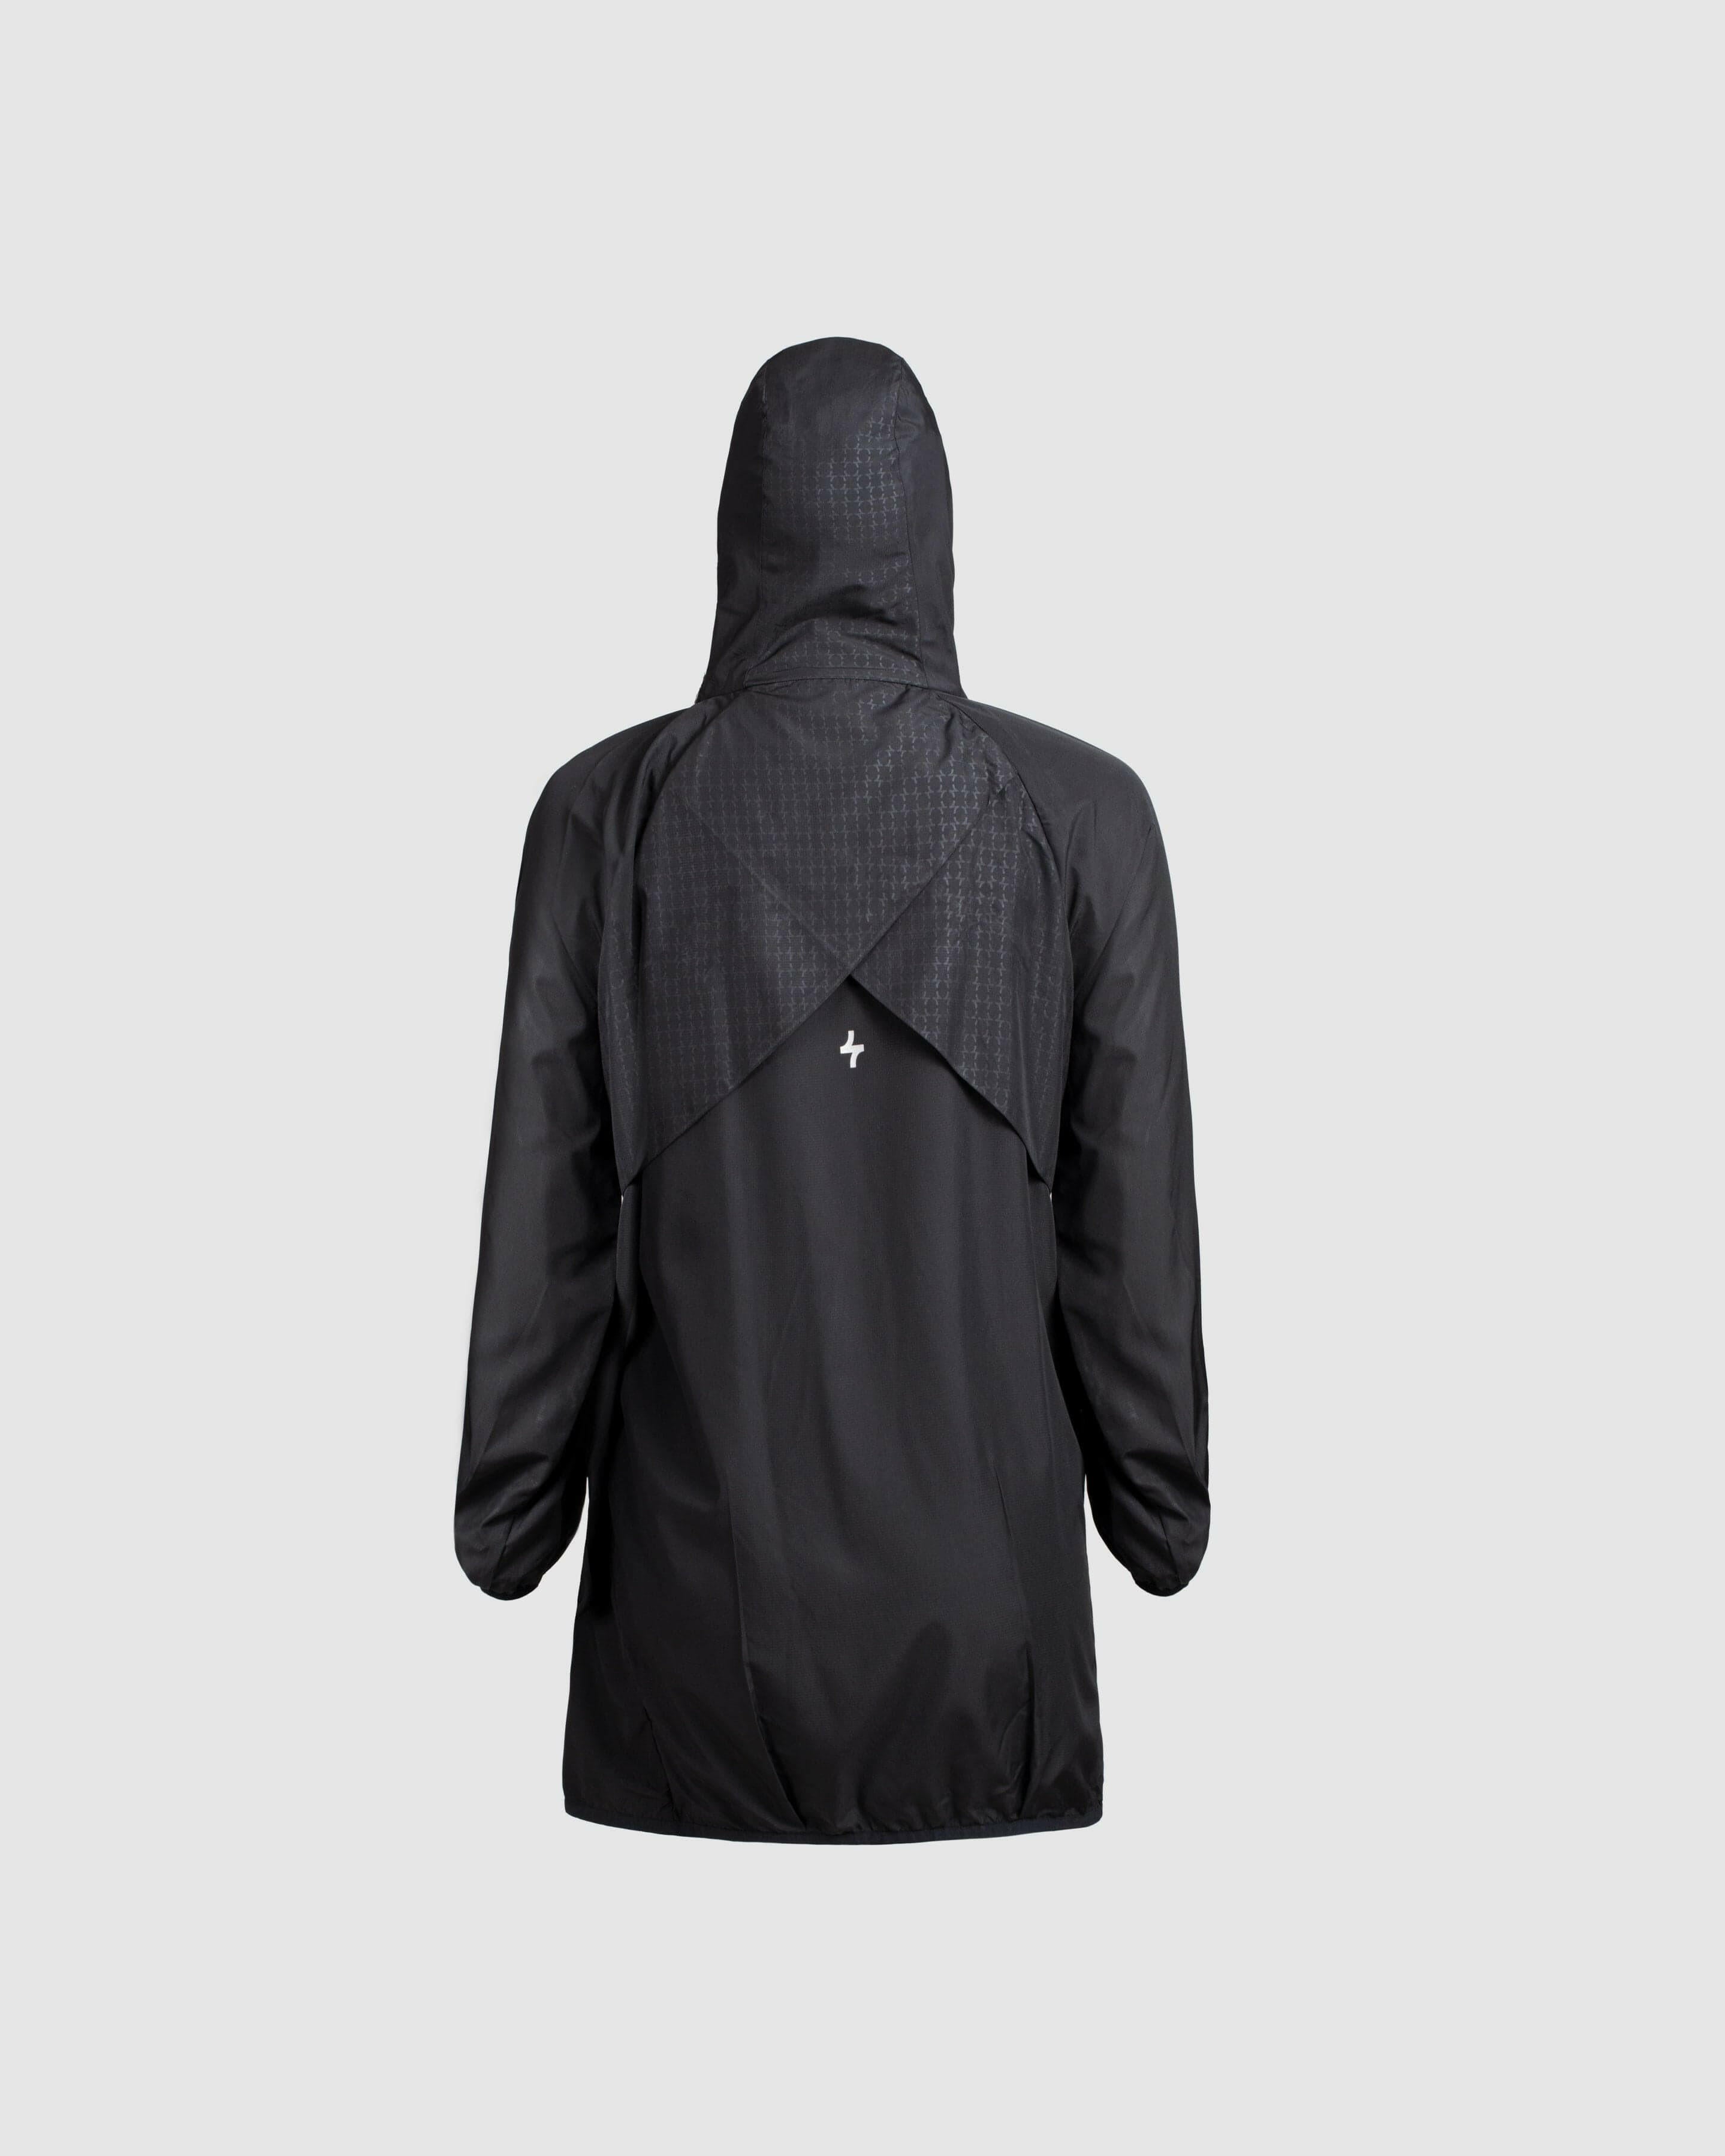 Back view of a lightweight black COOLDOWN coat by Qynda with a hood, displayed against a neutral background.